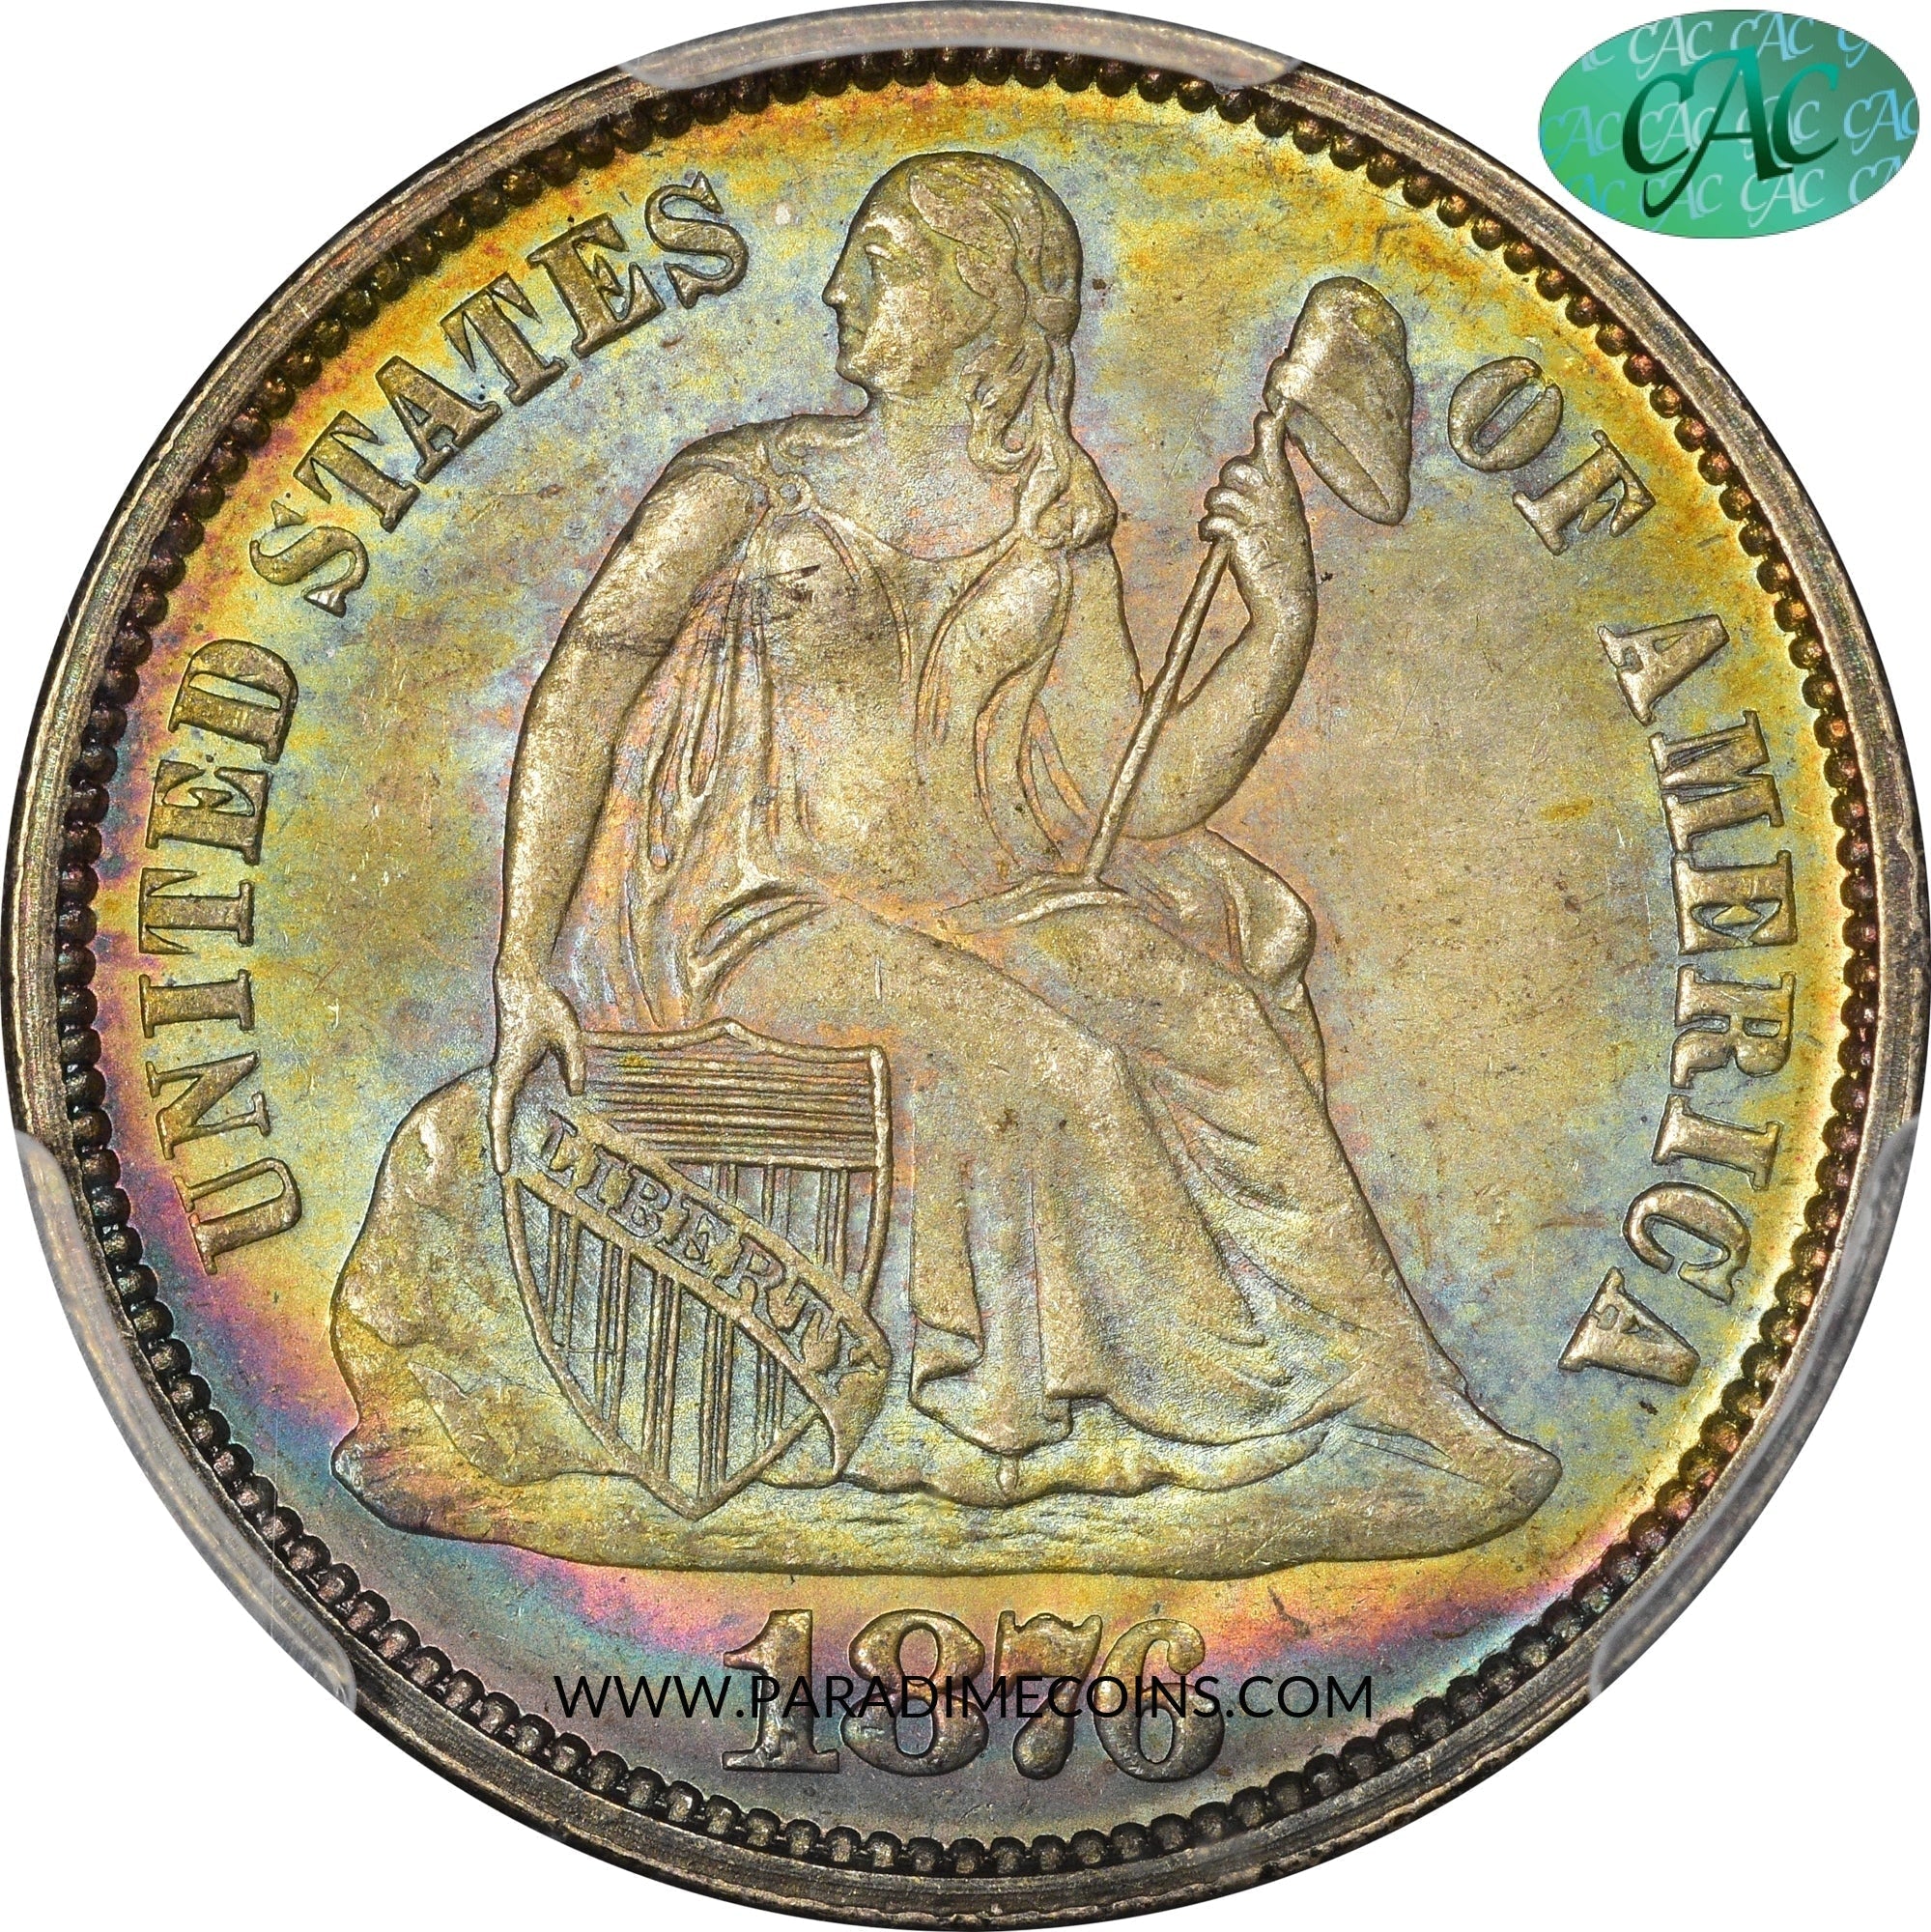 1876 10C MS66 PCGS CAC - Paradime Coins | PCGS NGC CACG CAC Rare US Numismatic Coins For Sale